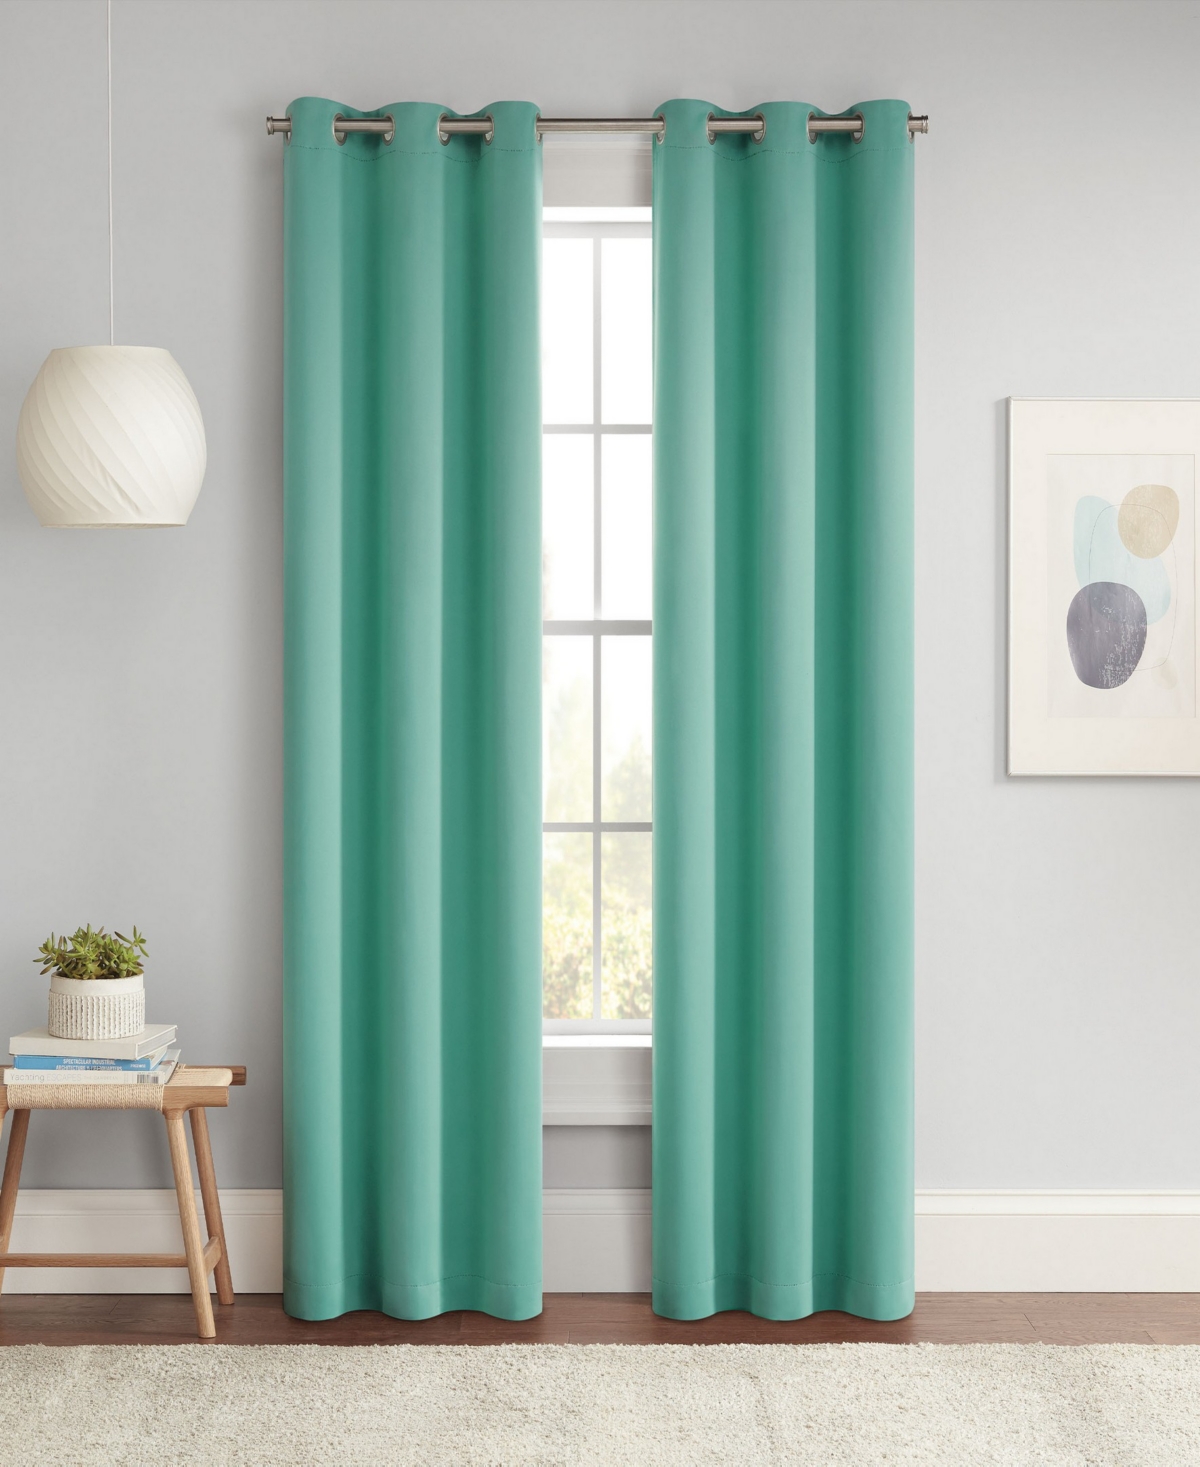 Eclipse Darrell Energy Saving Blackout Grommet Curtain Panel, 63" X 37" In Mint